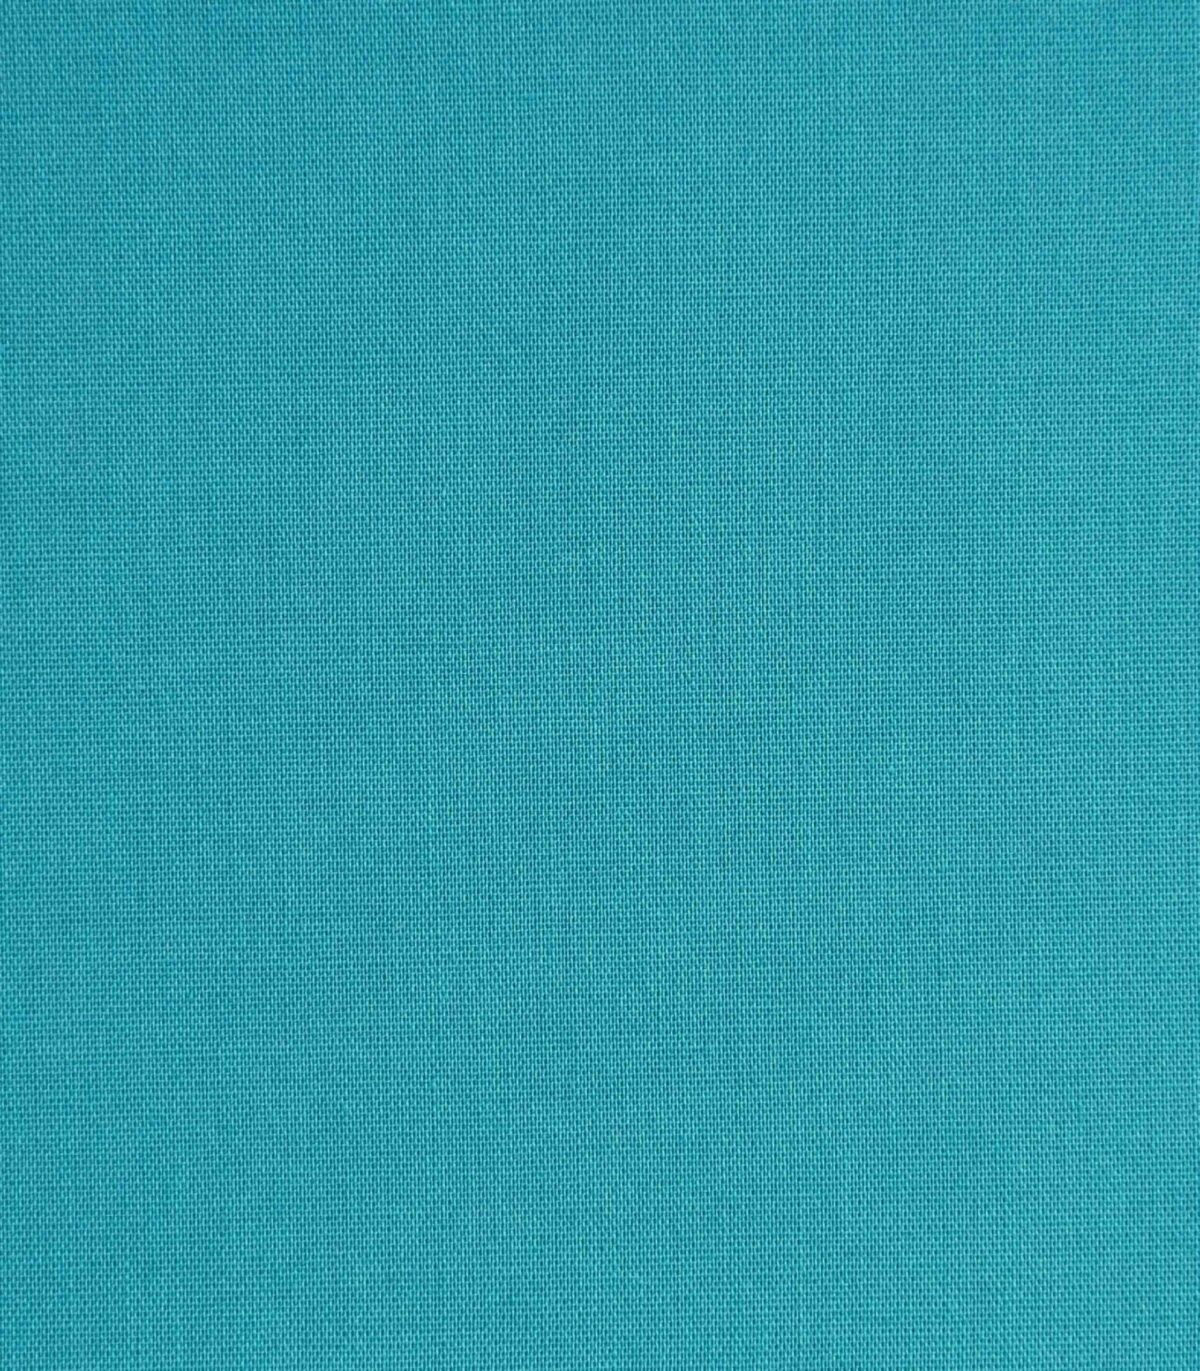 Cotton Poly Sky Blue Dyed Woven Fabric